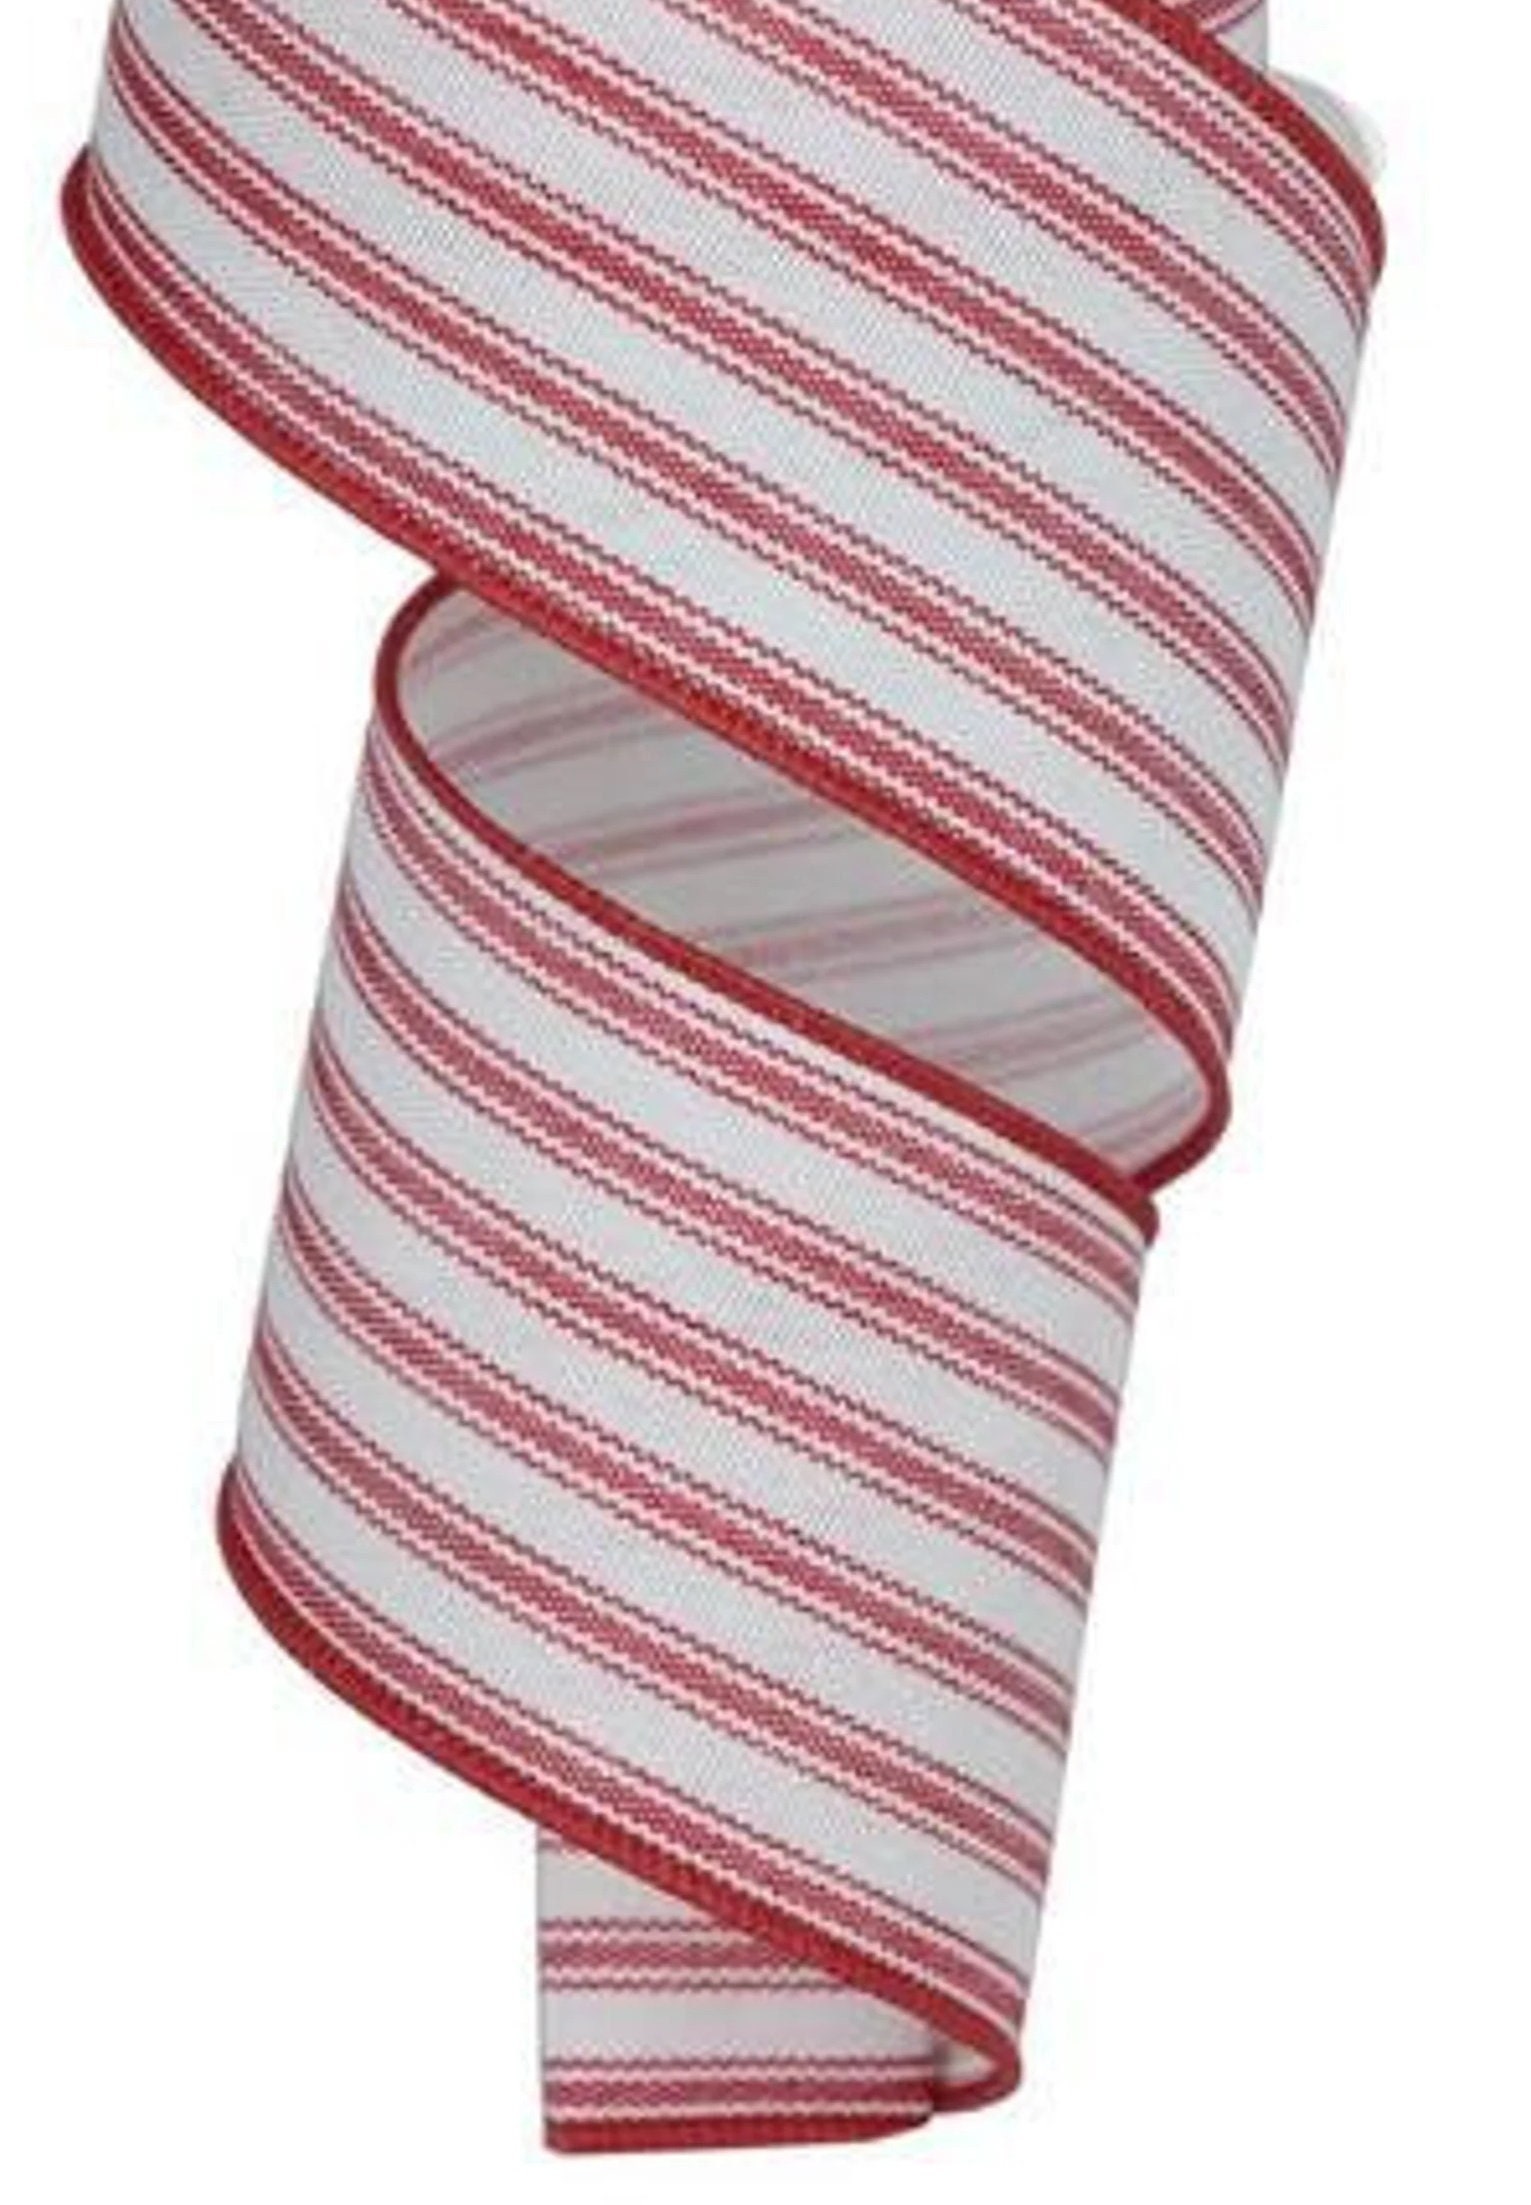 Fuzzy Edge Wired - Red and White - Ribbon - 1 1/2 inch - 1 Yard